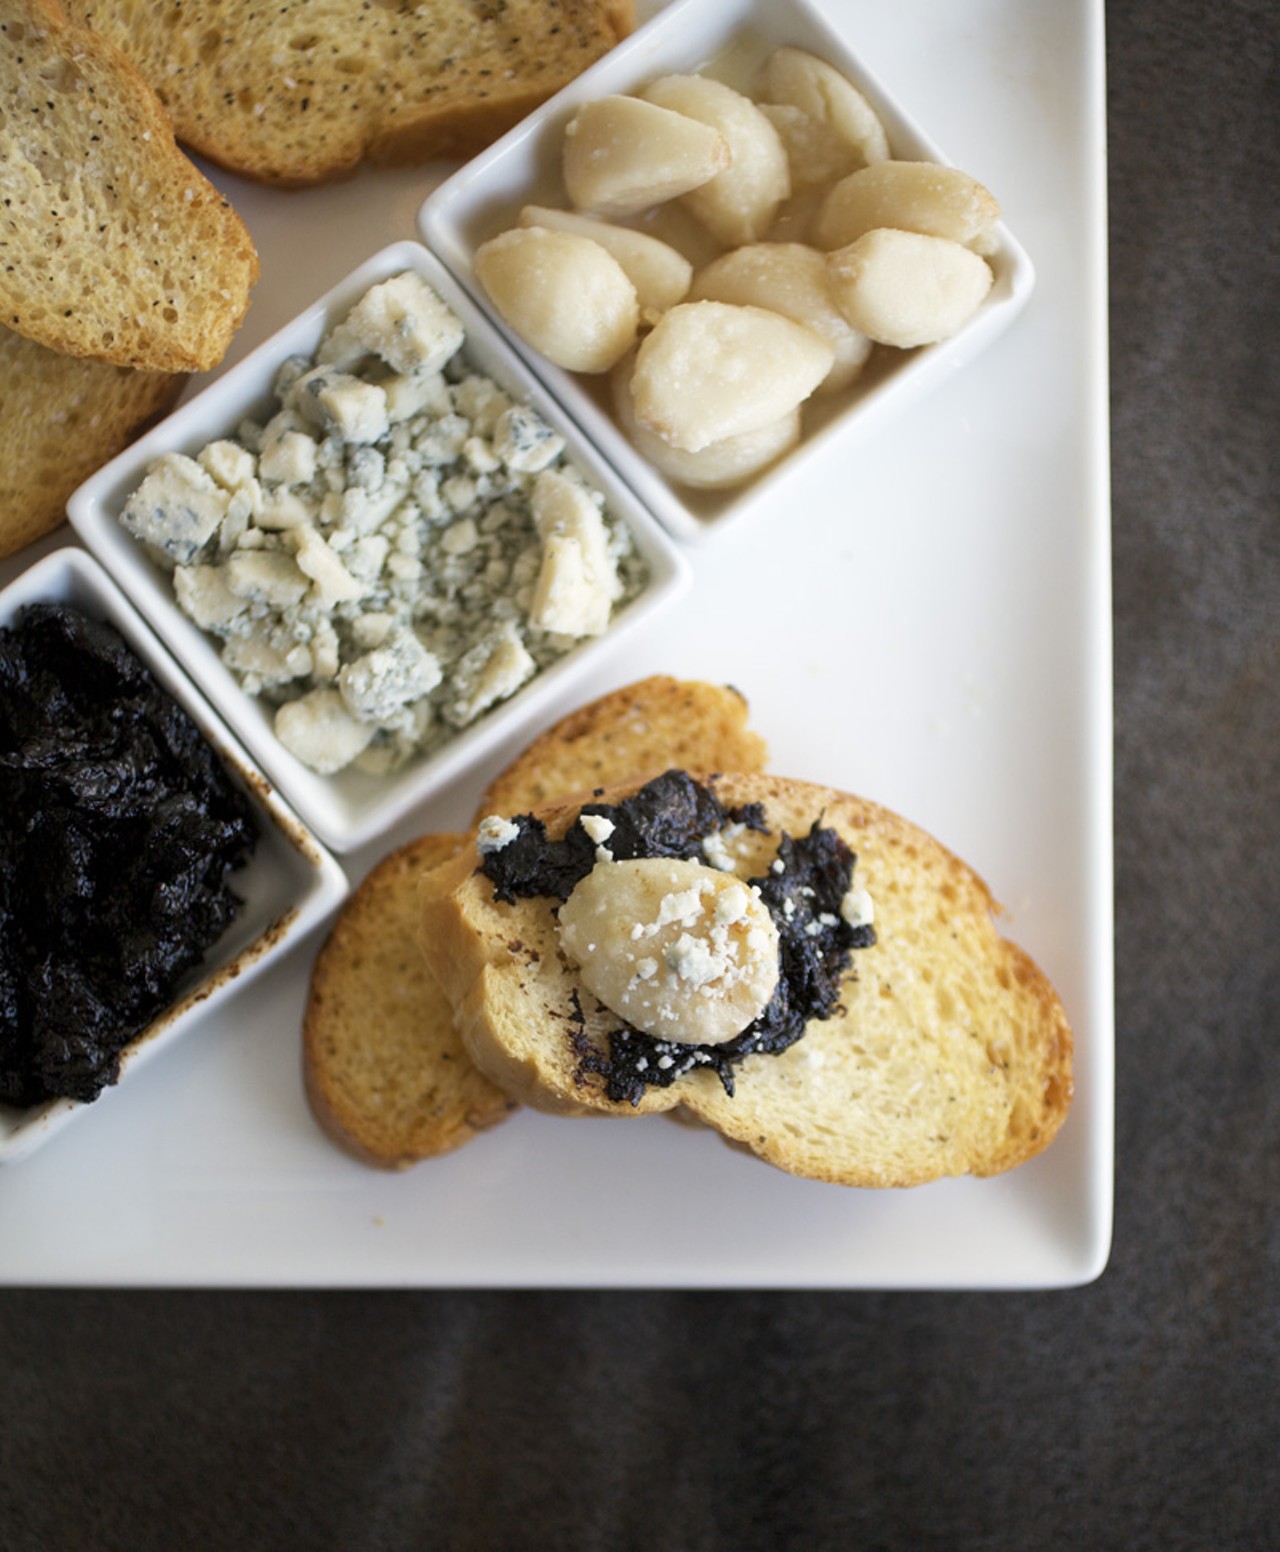 Ajo Asado - warm roasted garlic with house made balsamic jam, cabrales Spanish blue cheese, crostini and lavash.